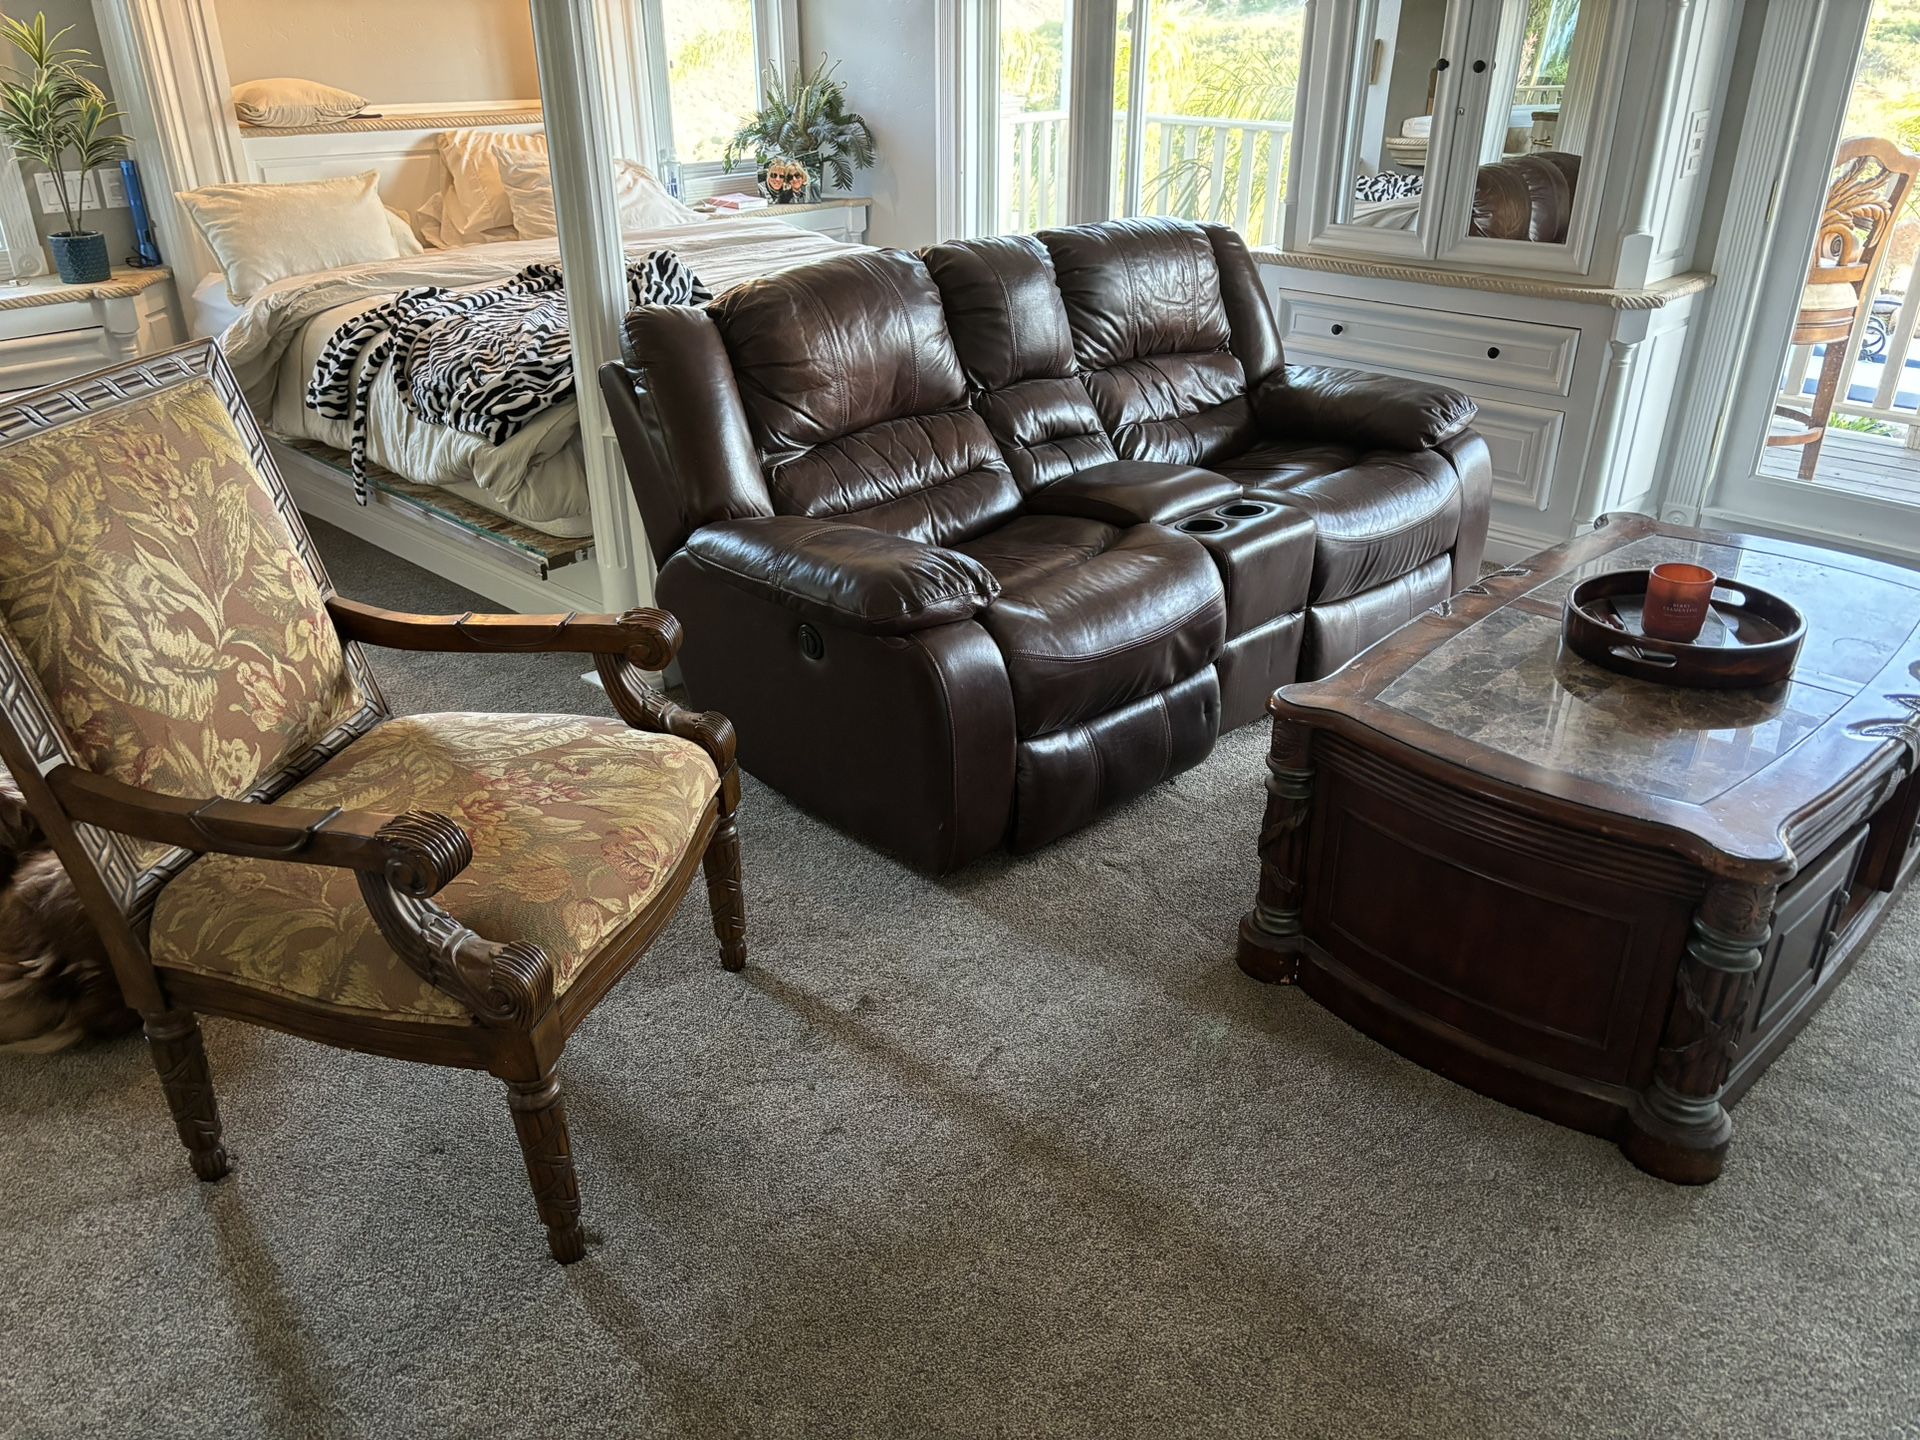 Leather Electric Reclining Couch, Accent Chair And Heavy Duty Wood With Marble Coffee Table